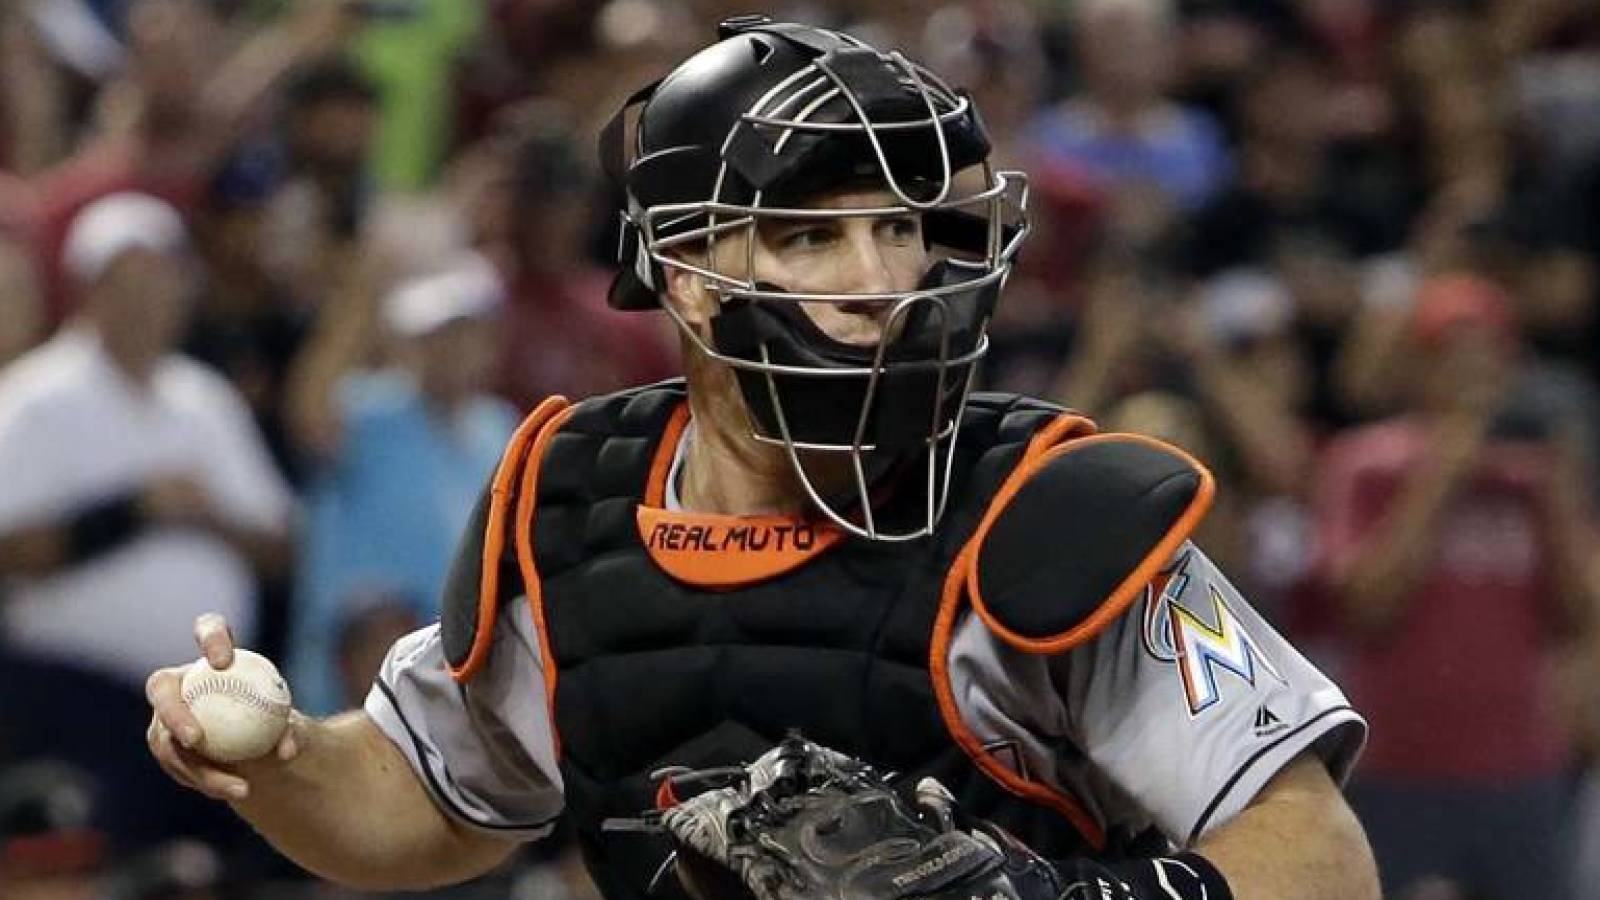 Report: Marlins C J.T. Realmuto requests trade